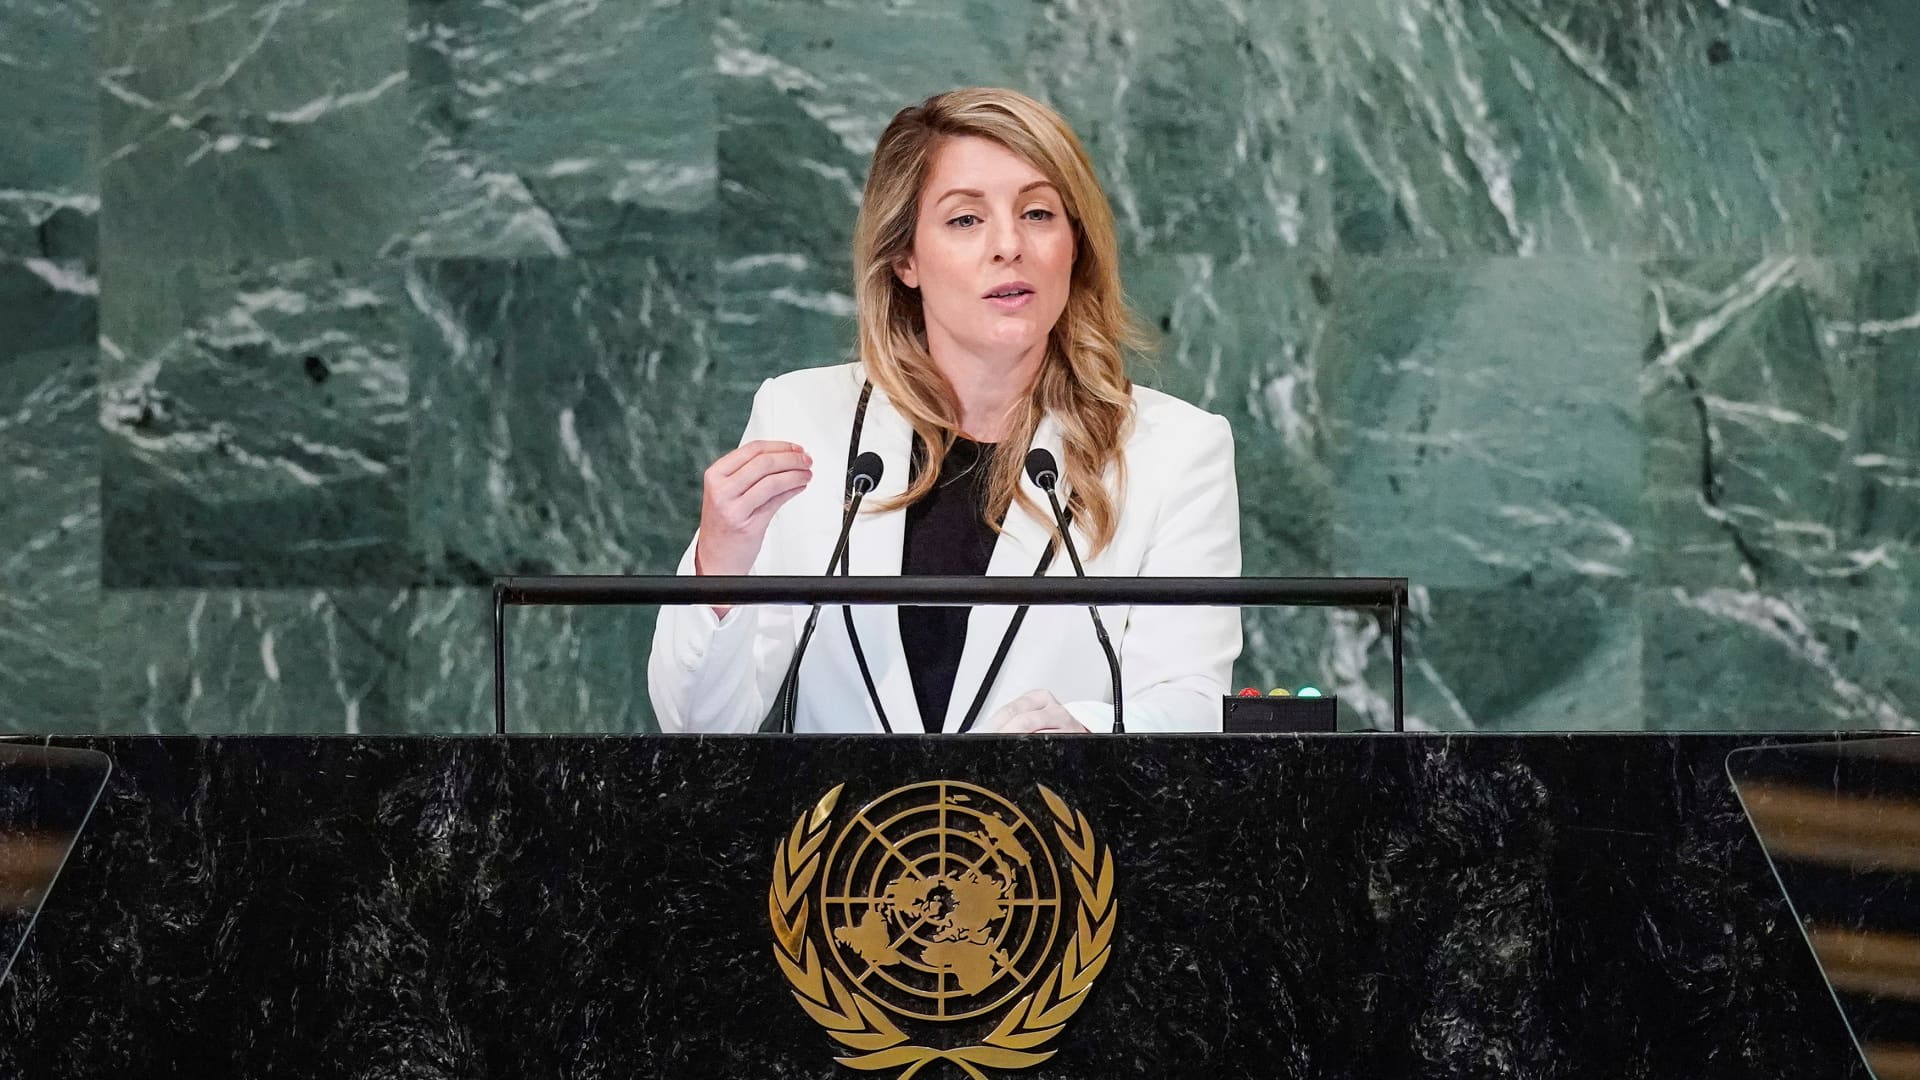 Canada's Minister of Foreign Affairs Melanie Joly addresses the 77th Session of the United Nations General Assembly at U.N. Headquarters in New York City, September 26, 2022.